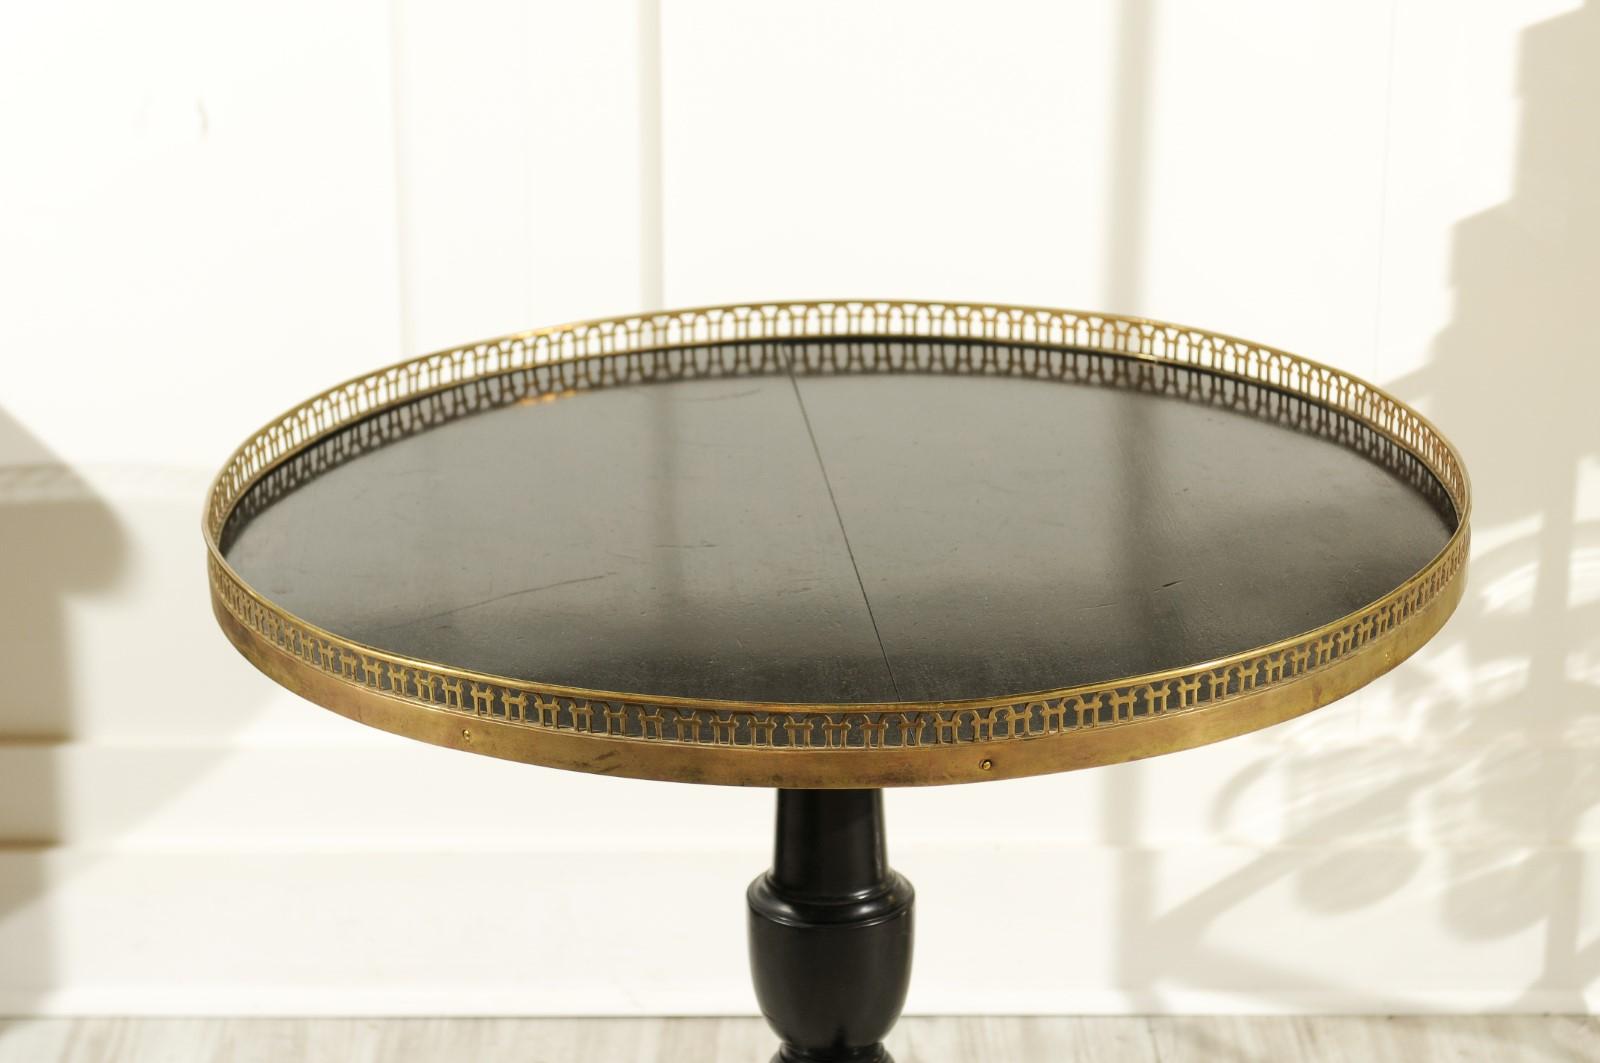 20th Century French 1920s Black-Painted Pedestal Tilt-Top Table with Pierced Brass Gallery